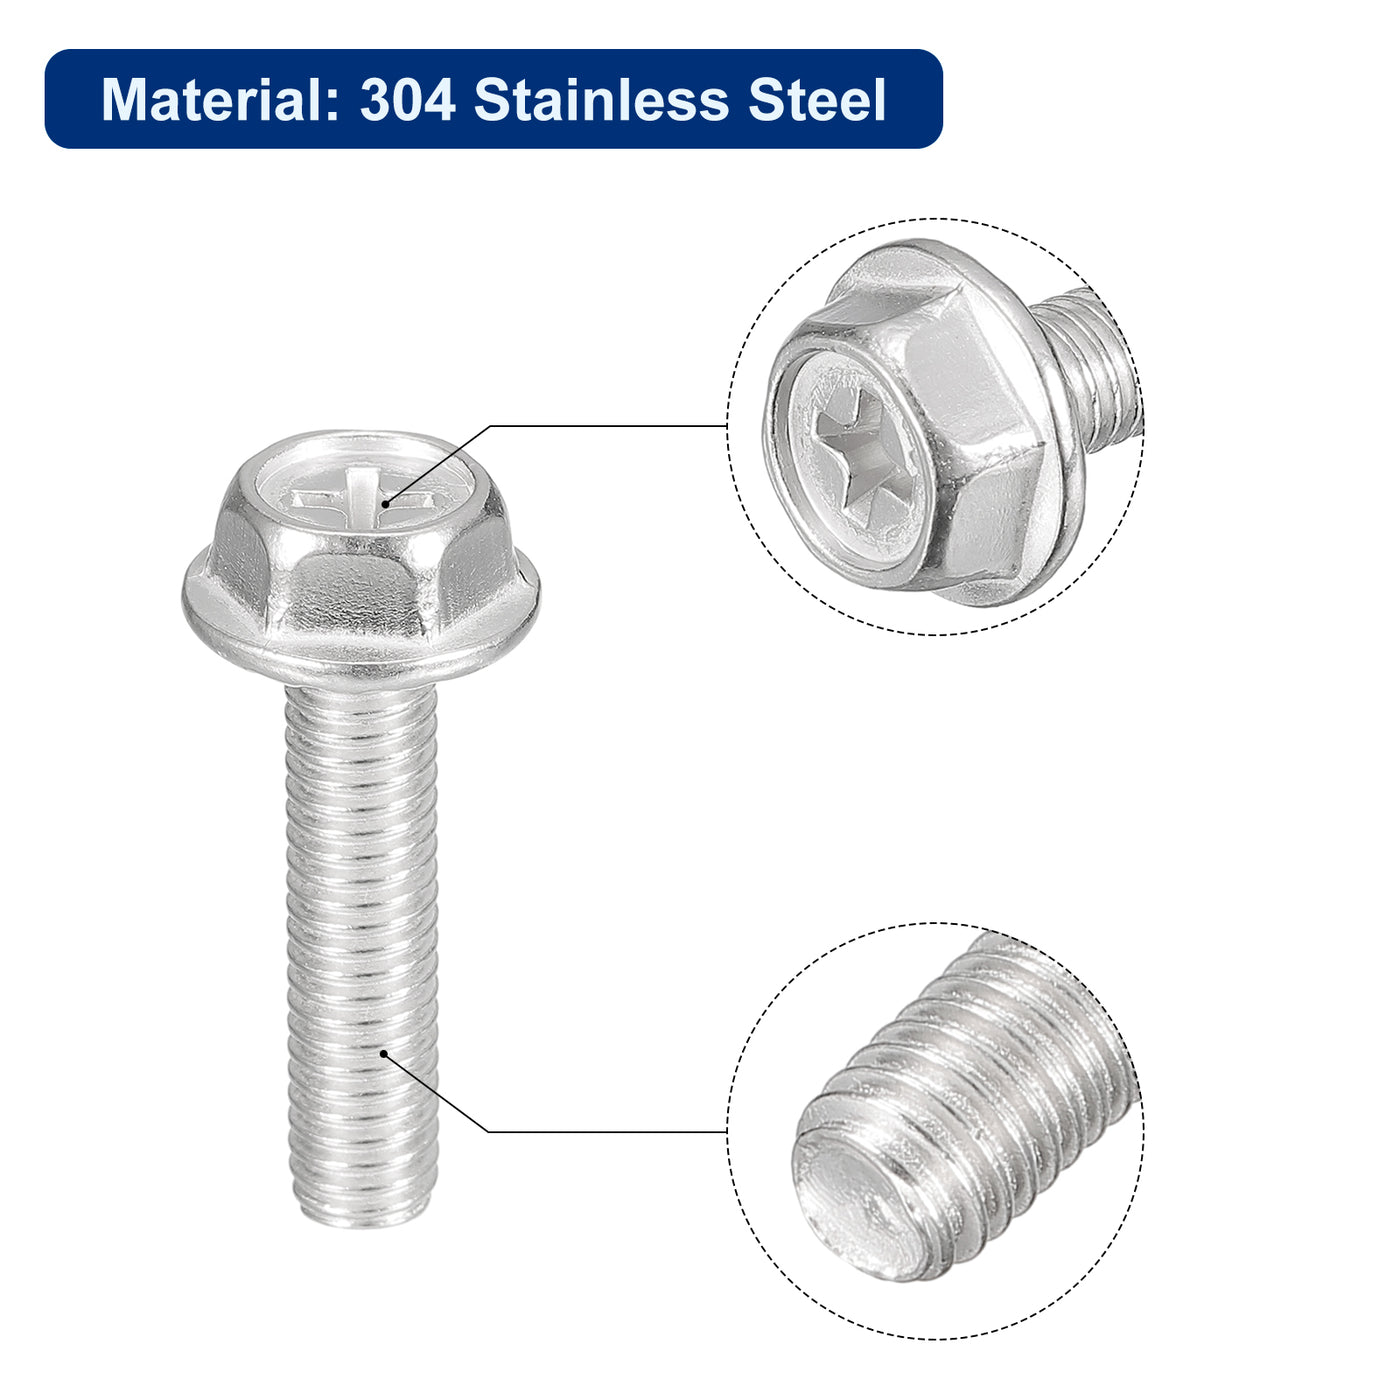 uxcell Uxcell M6x25mm Phillips Hex Head Flange Bolts, 10pcs 304 Stainless Steel Screws